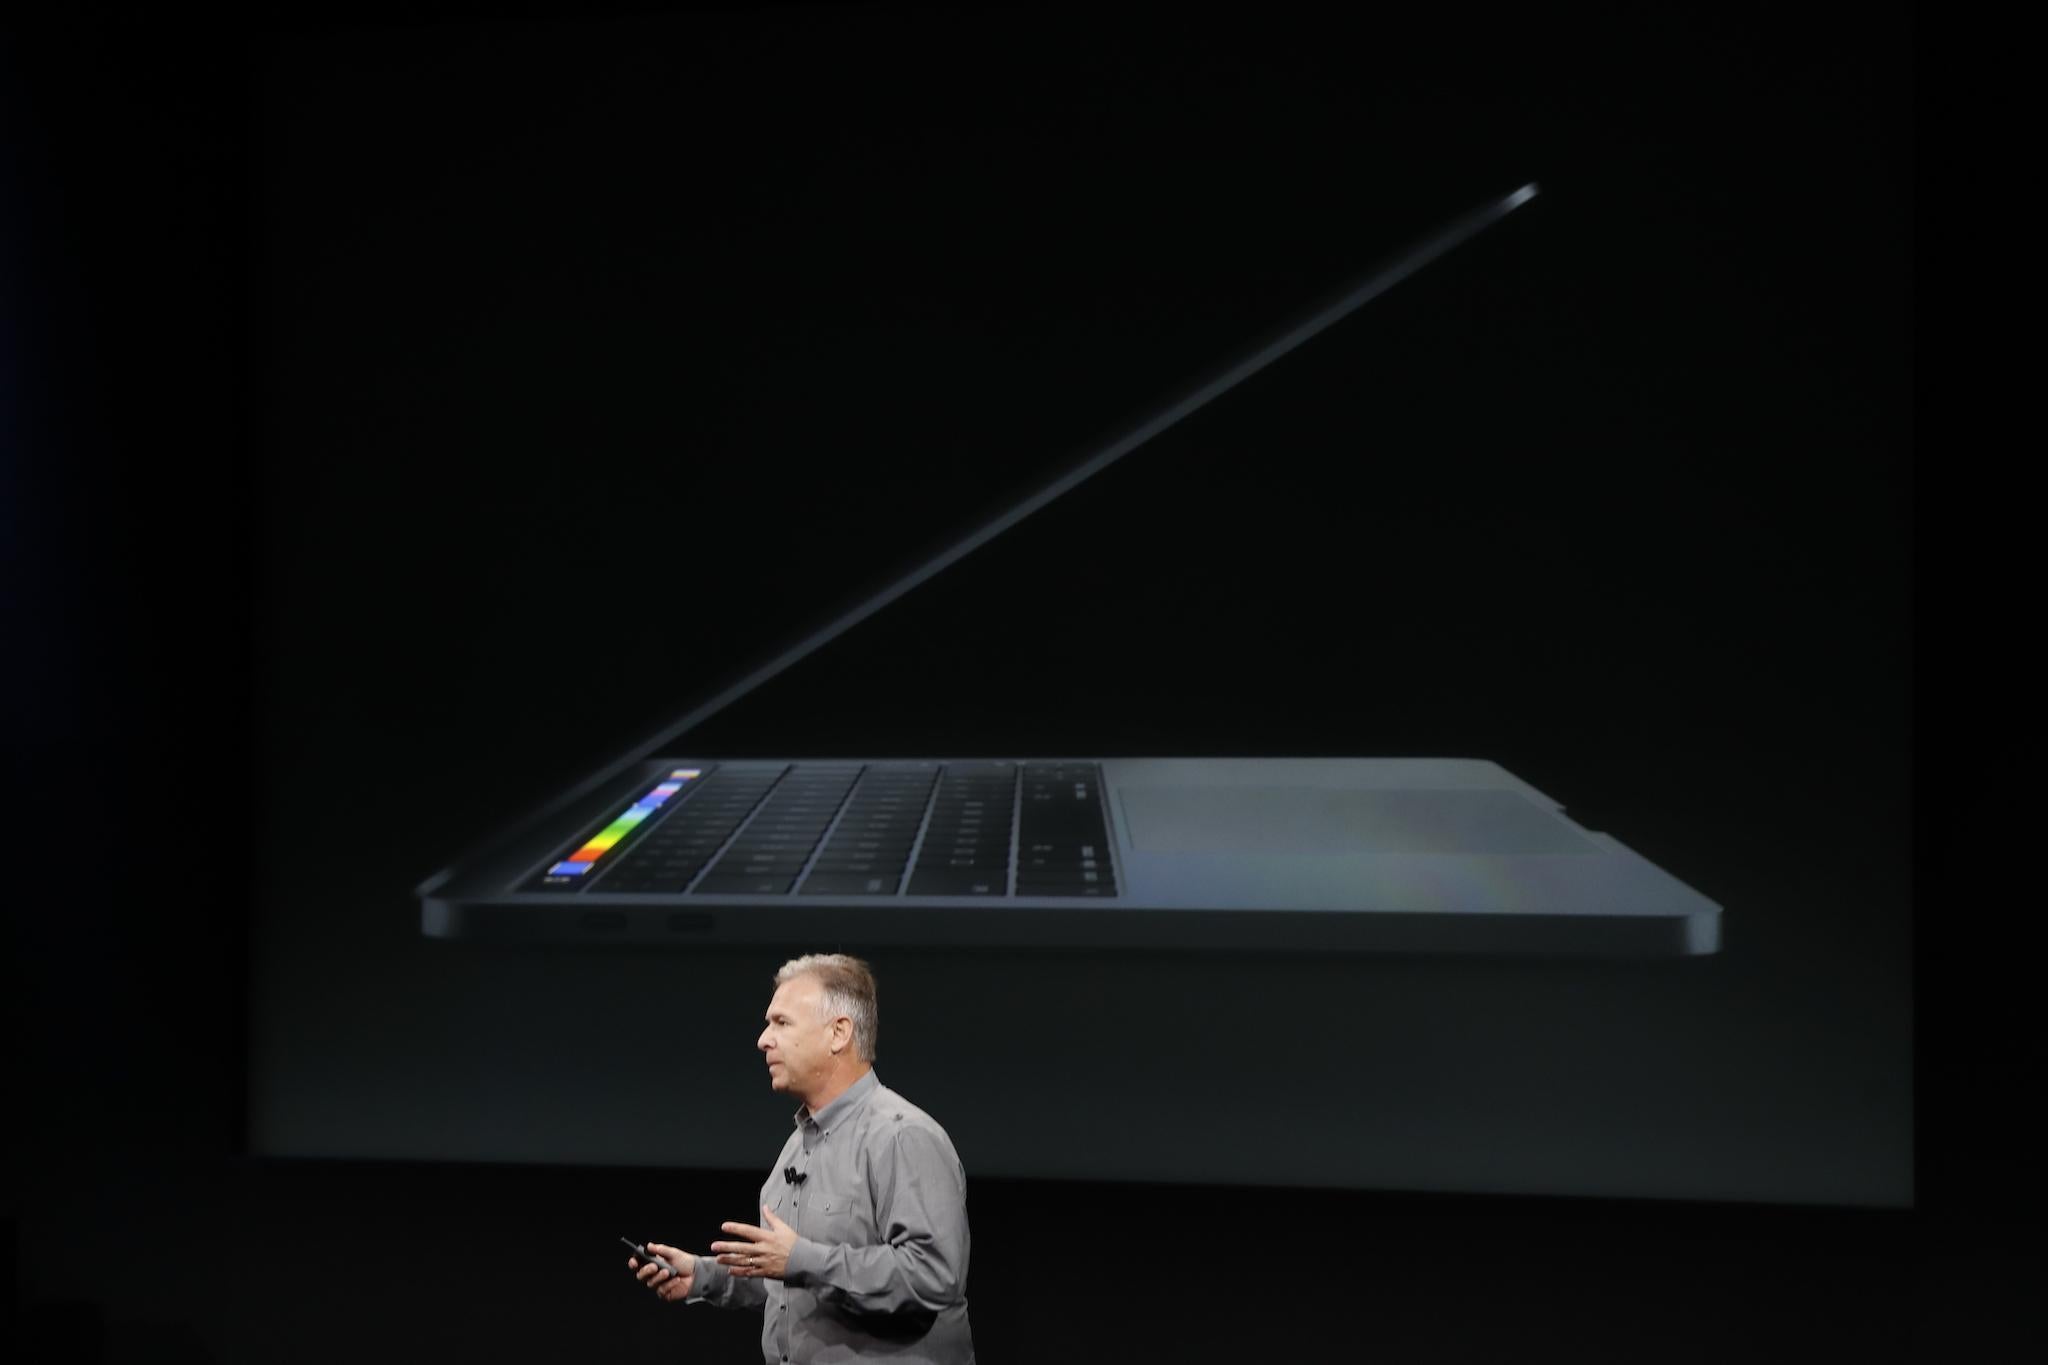 Apple Senior Vice President of Worldwide Marketing Phil Schiller introduces the all-new MacBook Pro during a product launch event on October 27, 2016 in Cupertino, California (Stephen Lam/Getty Images)